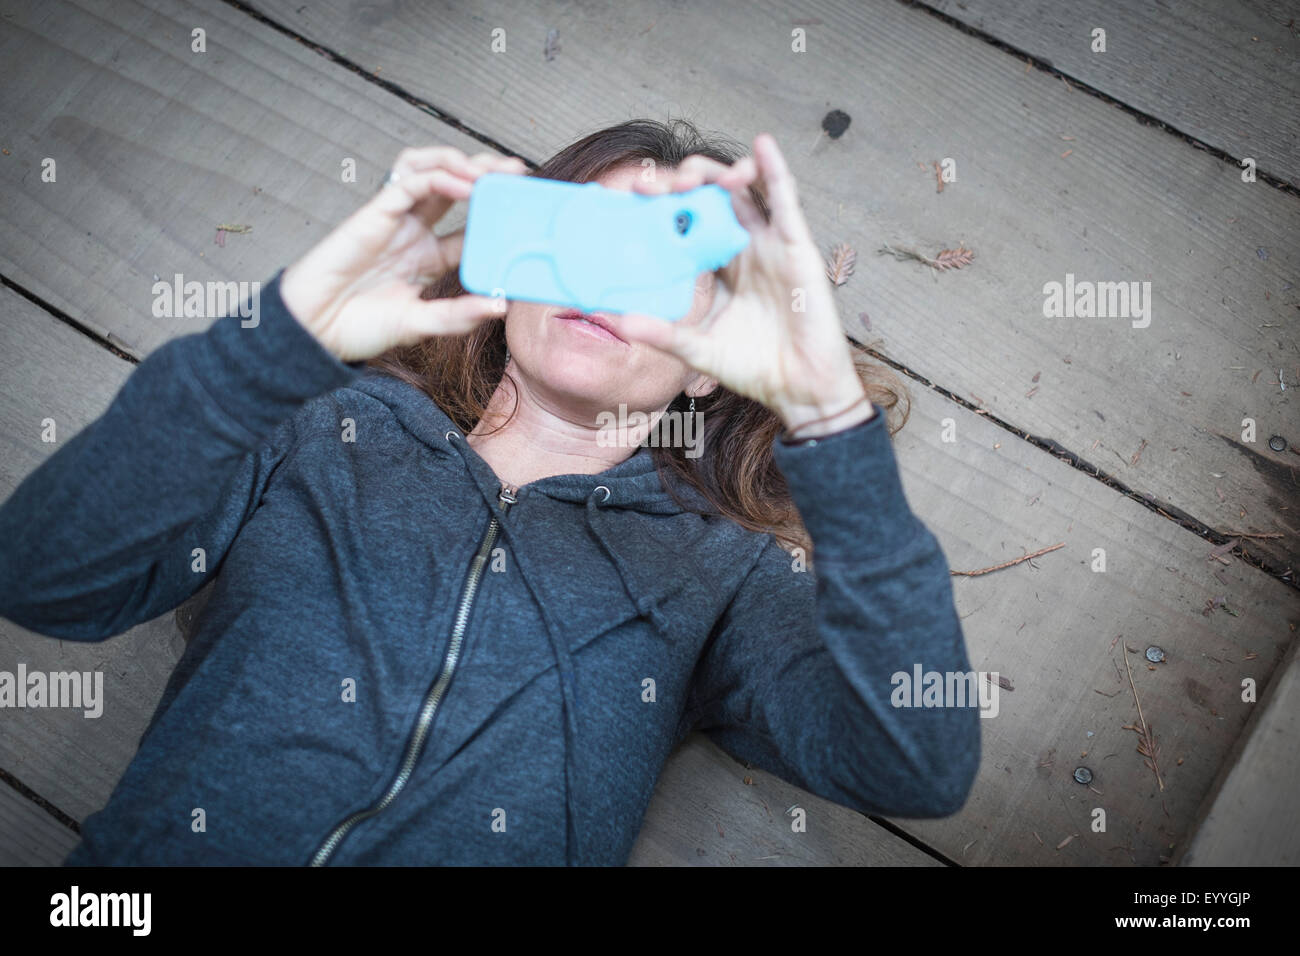 Caucasian woman laying on wooden deck taking cell phone selfie Stock Photo